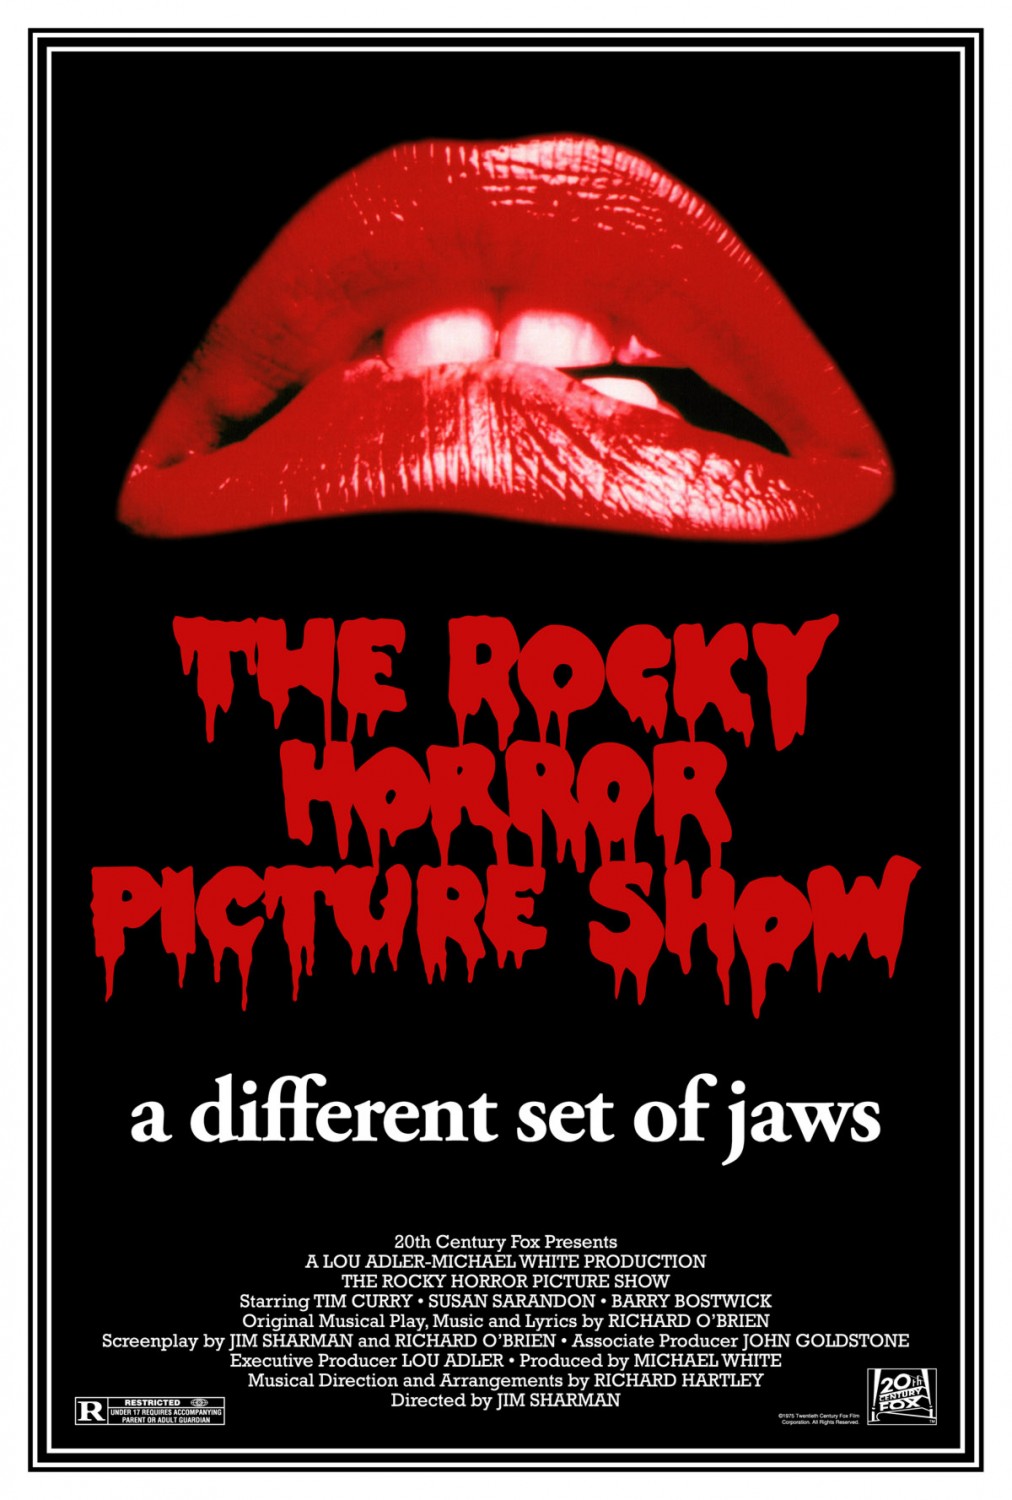 THE ROCKY HORROR PICTURE SHOW • special HALLOWEEN screening event 